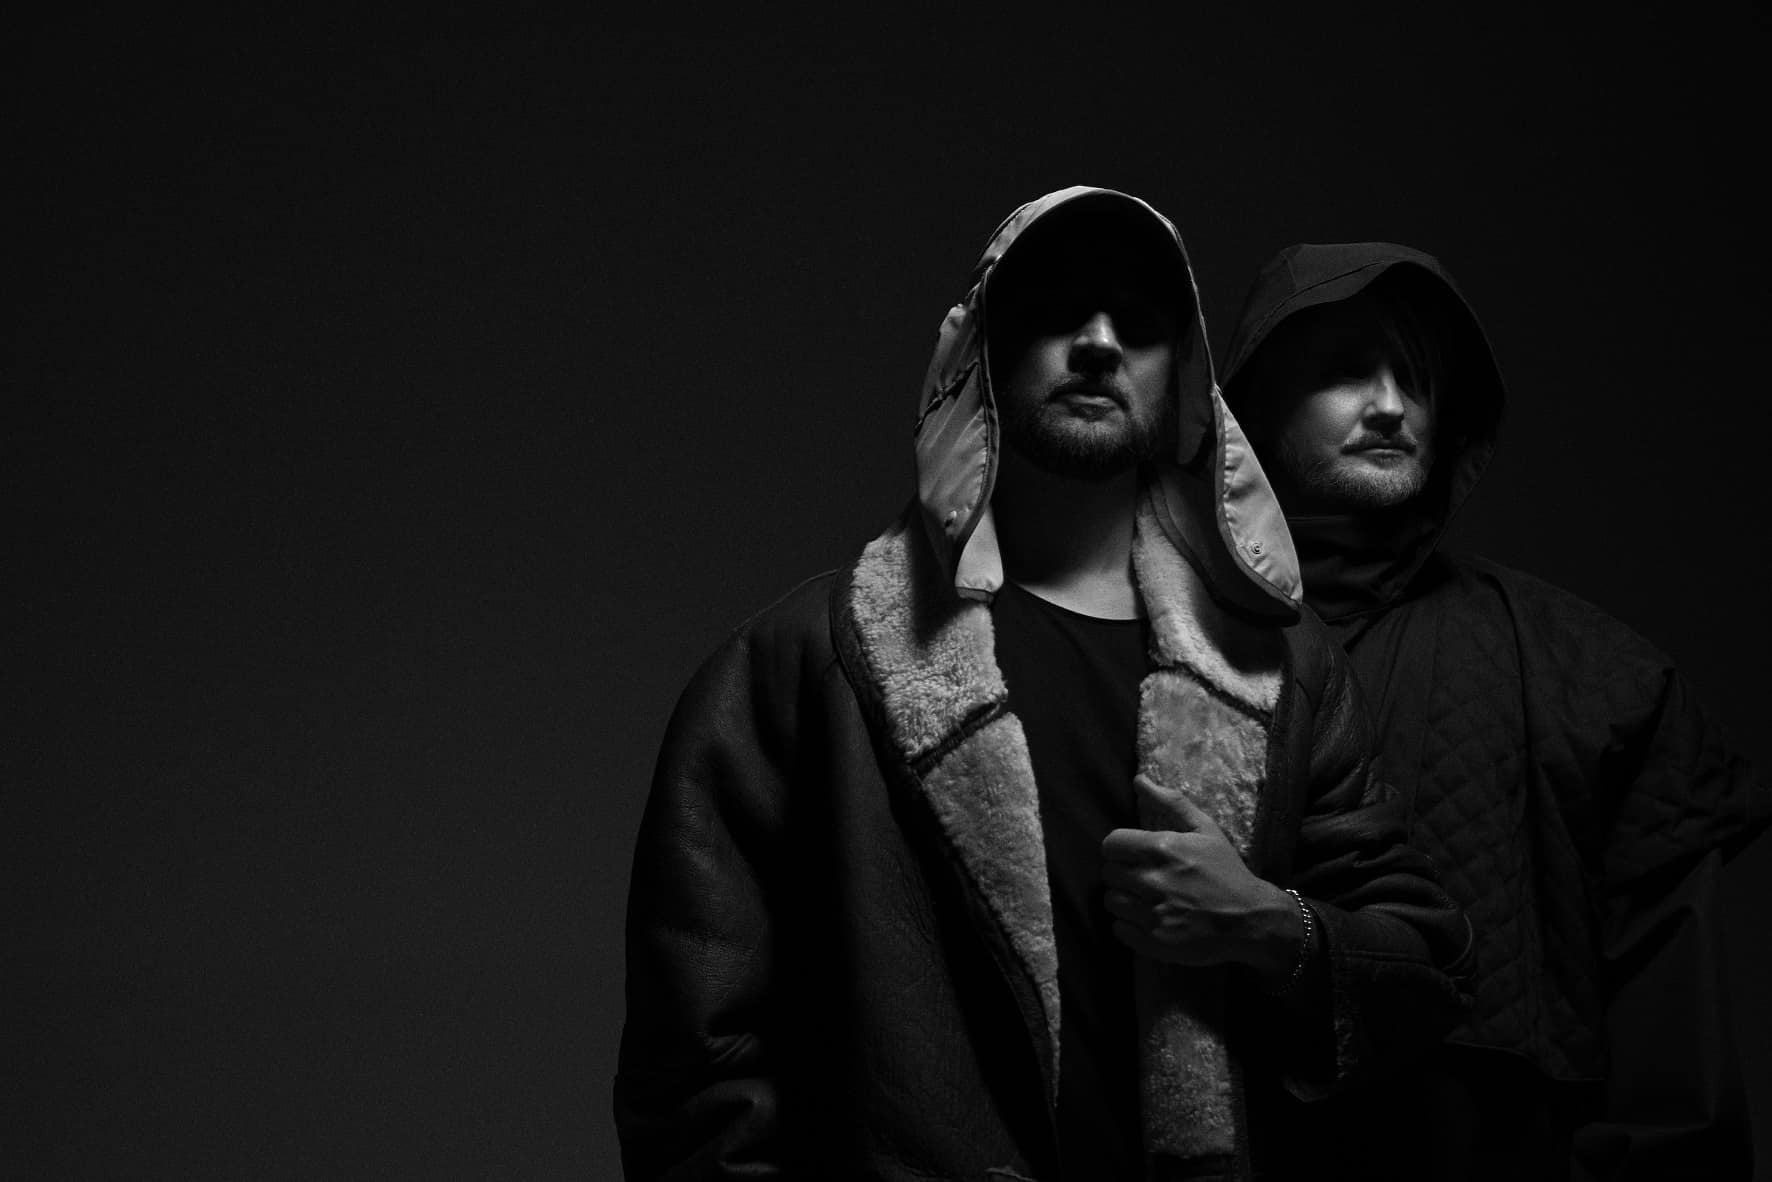 Rӧyksopp announce ‘Profound Mysteries’ project with brand-new single ‘Impossible’: Listen